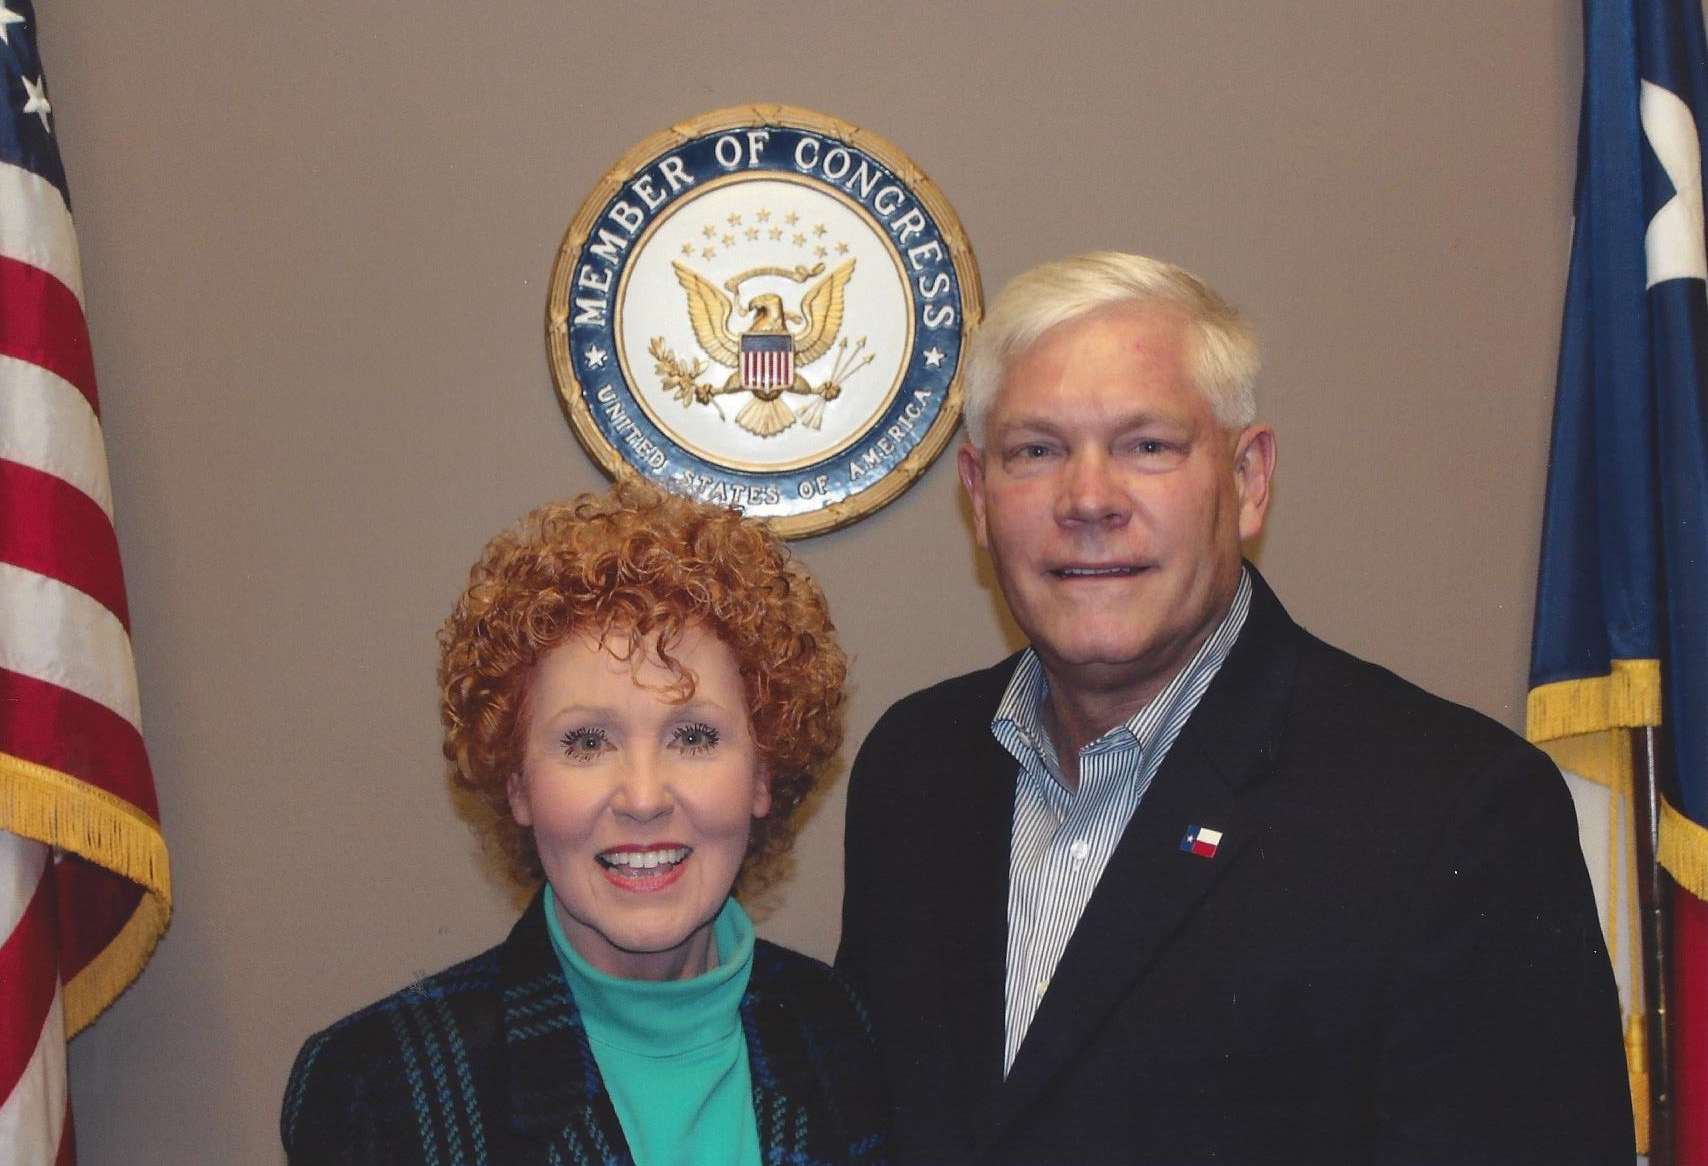 Dr. Scott and Pete Sessions